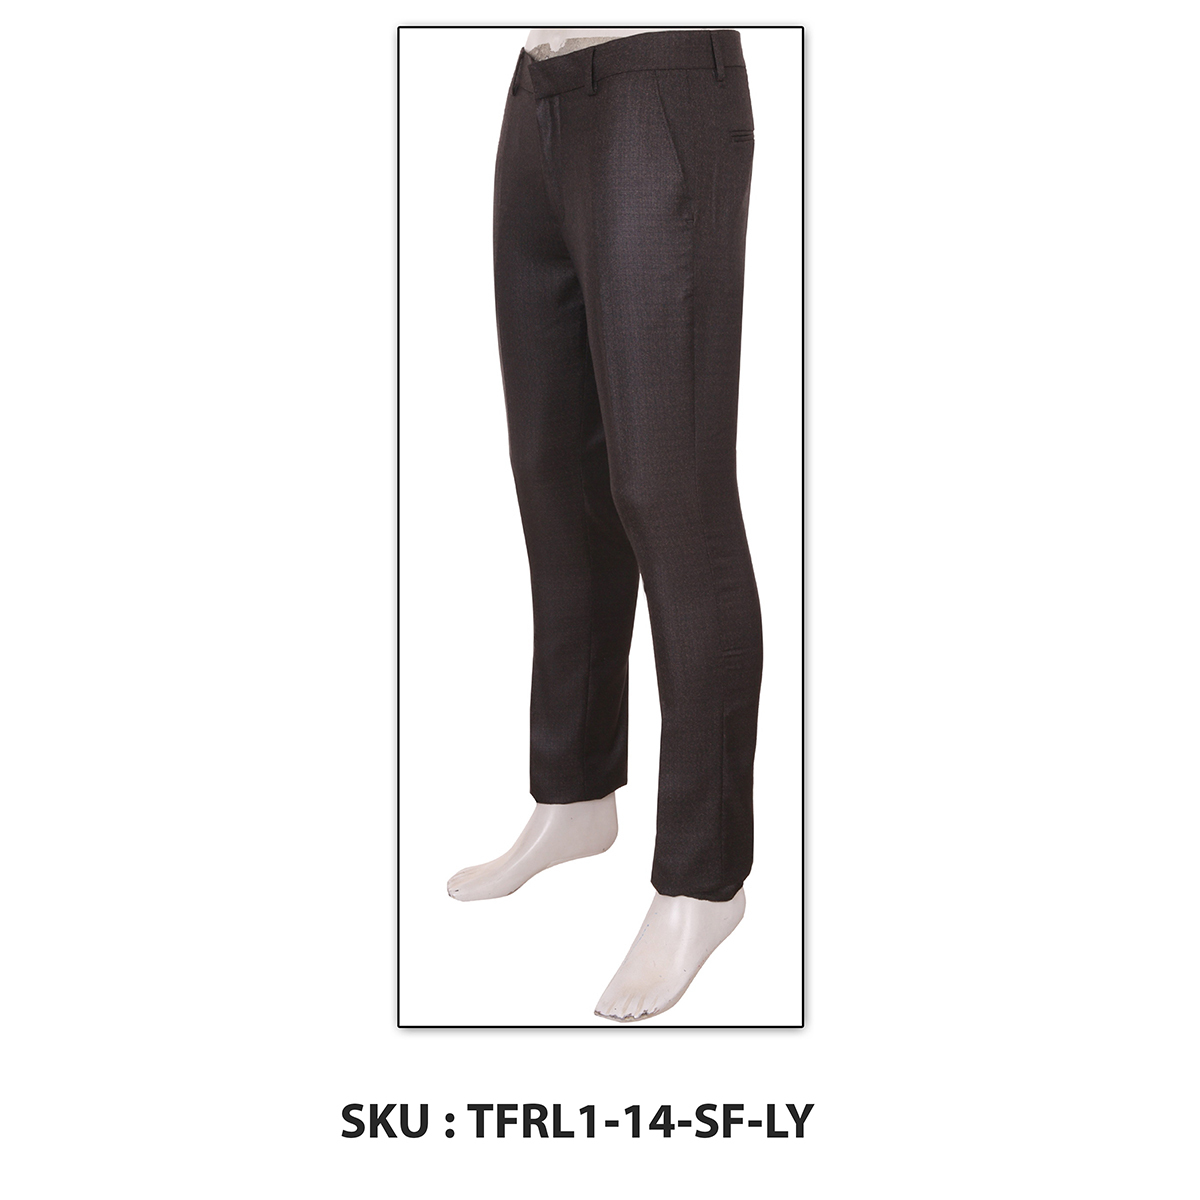 Classic Polo Mens Trousers Tfrl1-14-Sf-Ly Brown 40